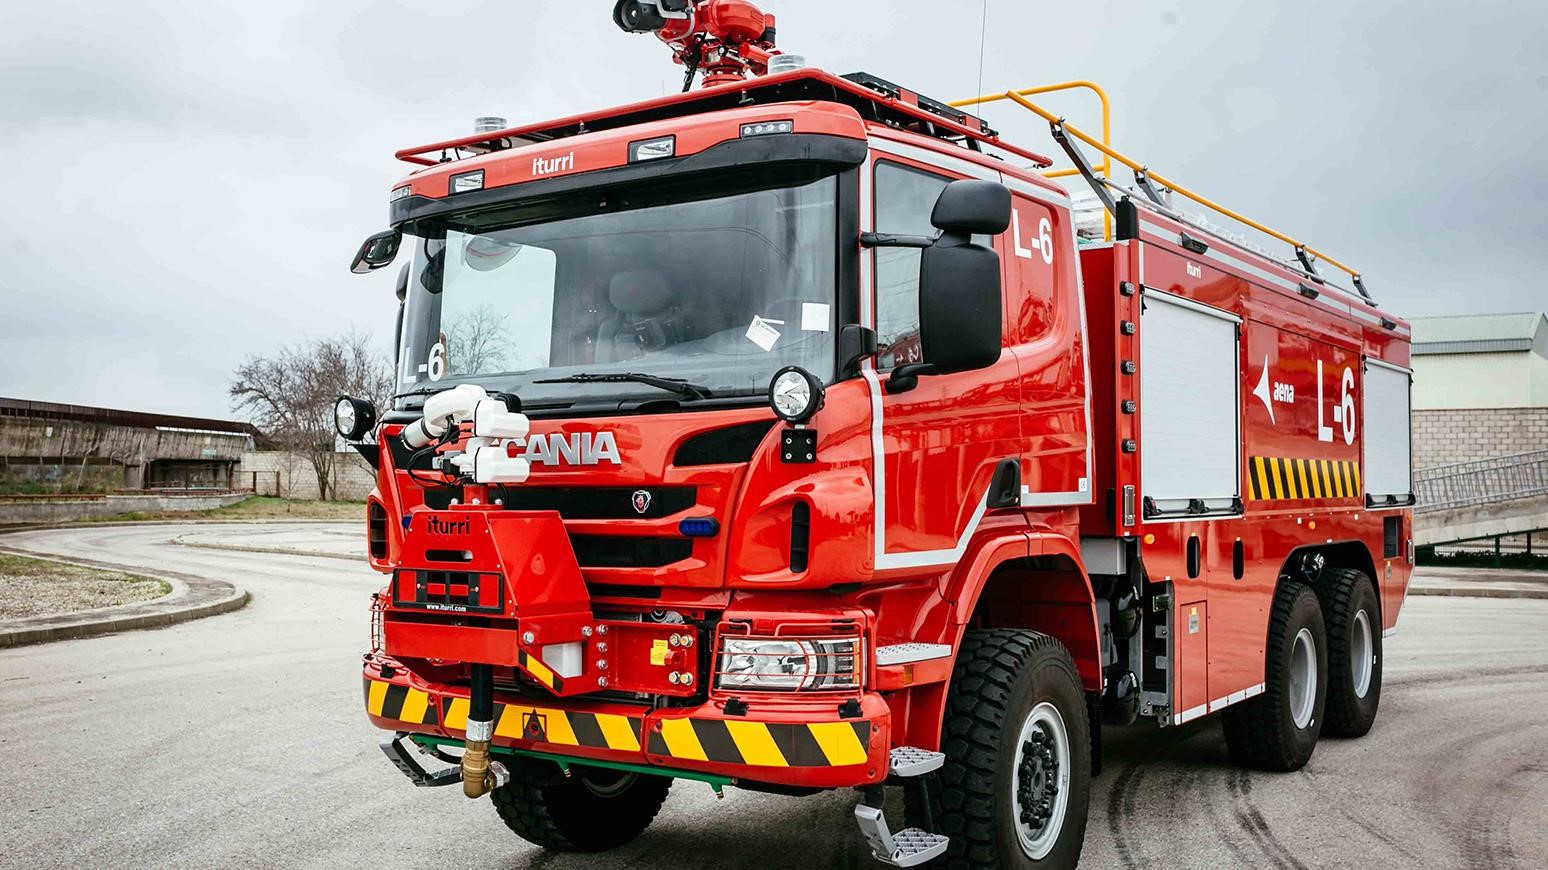 Aena Brings In 14 Scania P 490 Fire Trucks To Serve At Its Airports